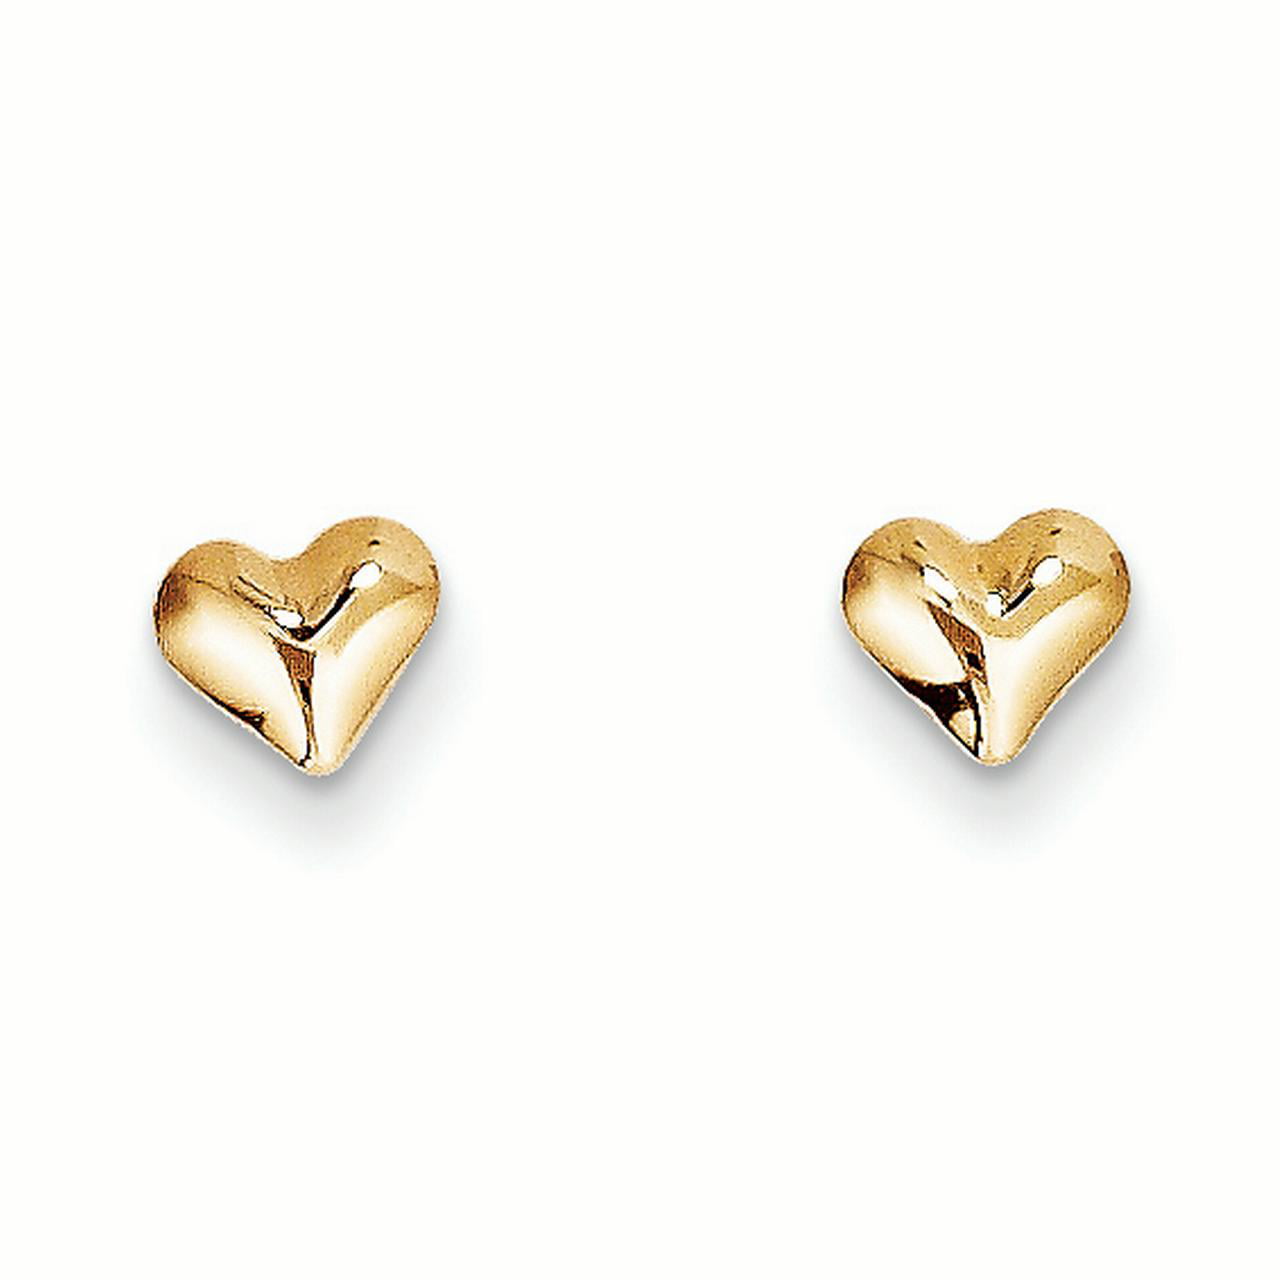 Approximate Measurements 8mm x 6mm Madi K 14K Two-Tone Gold Small Cross Heart Post Earrings